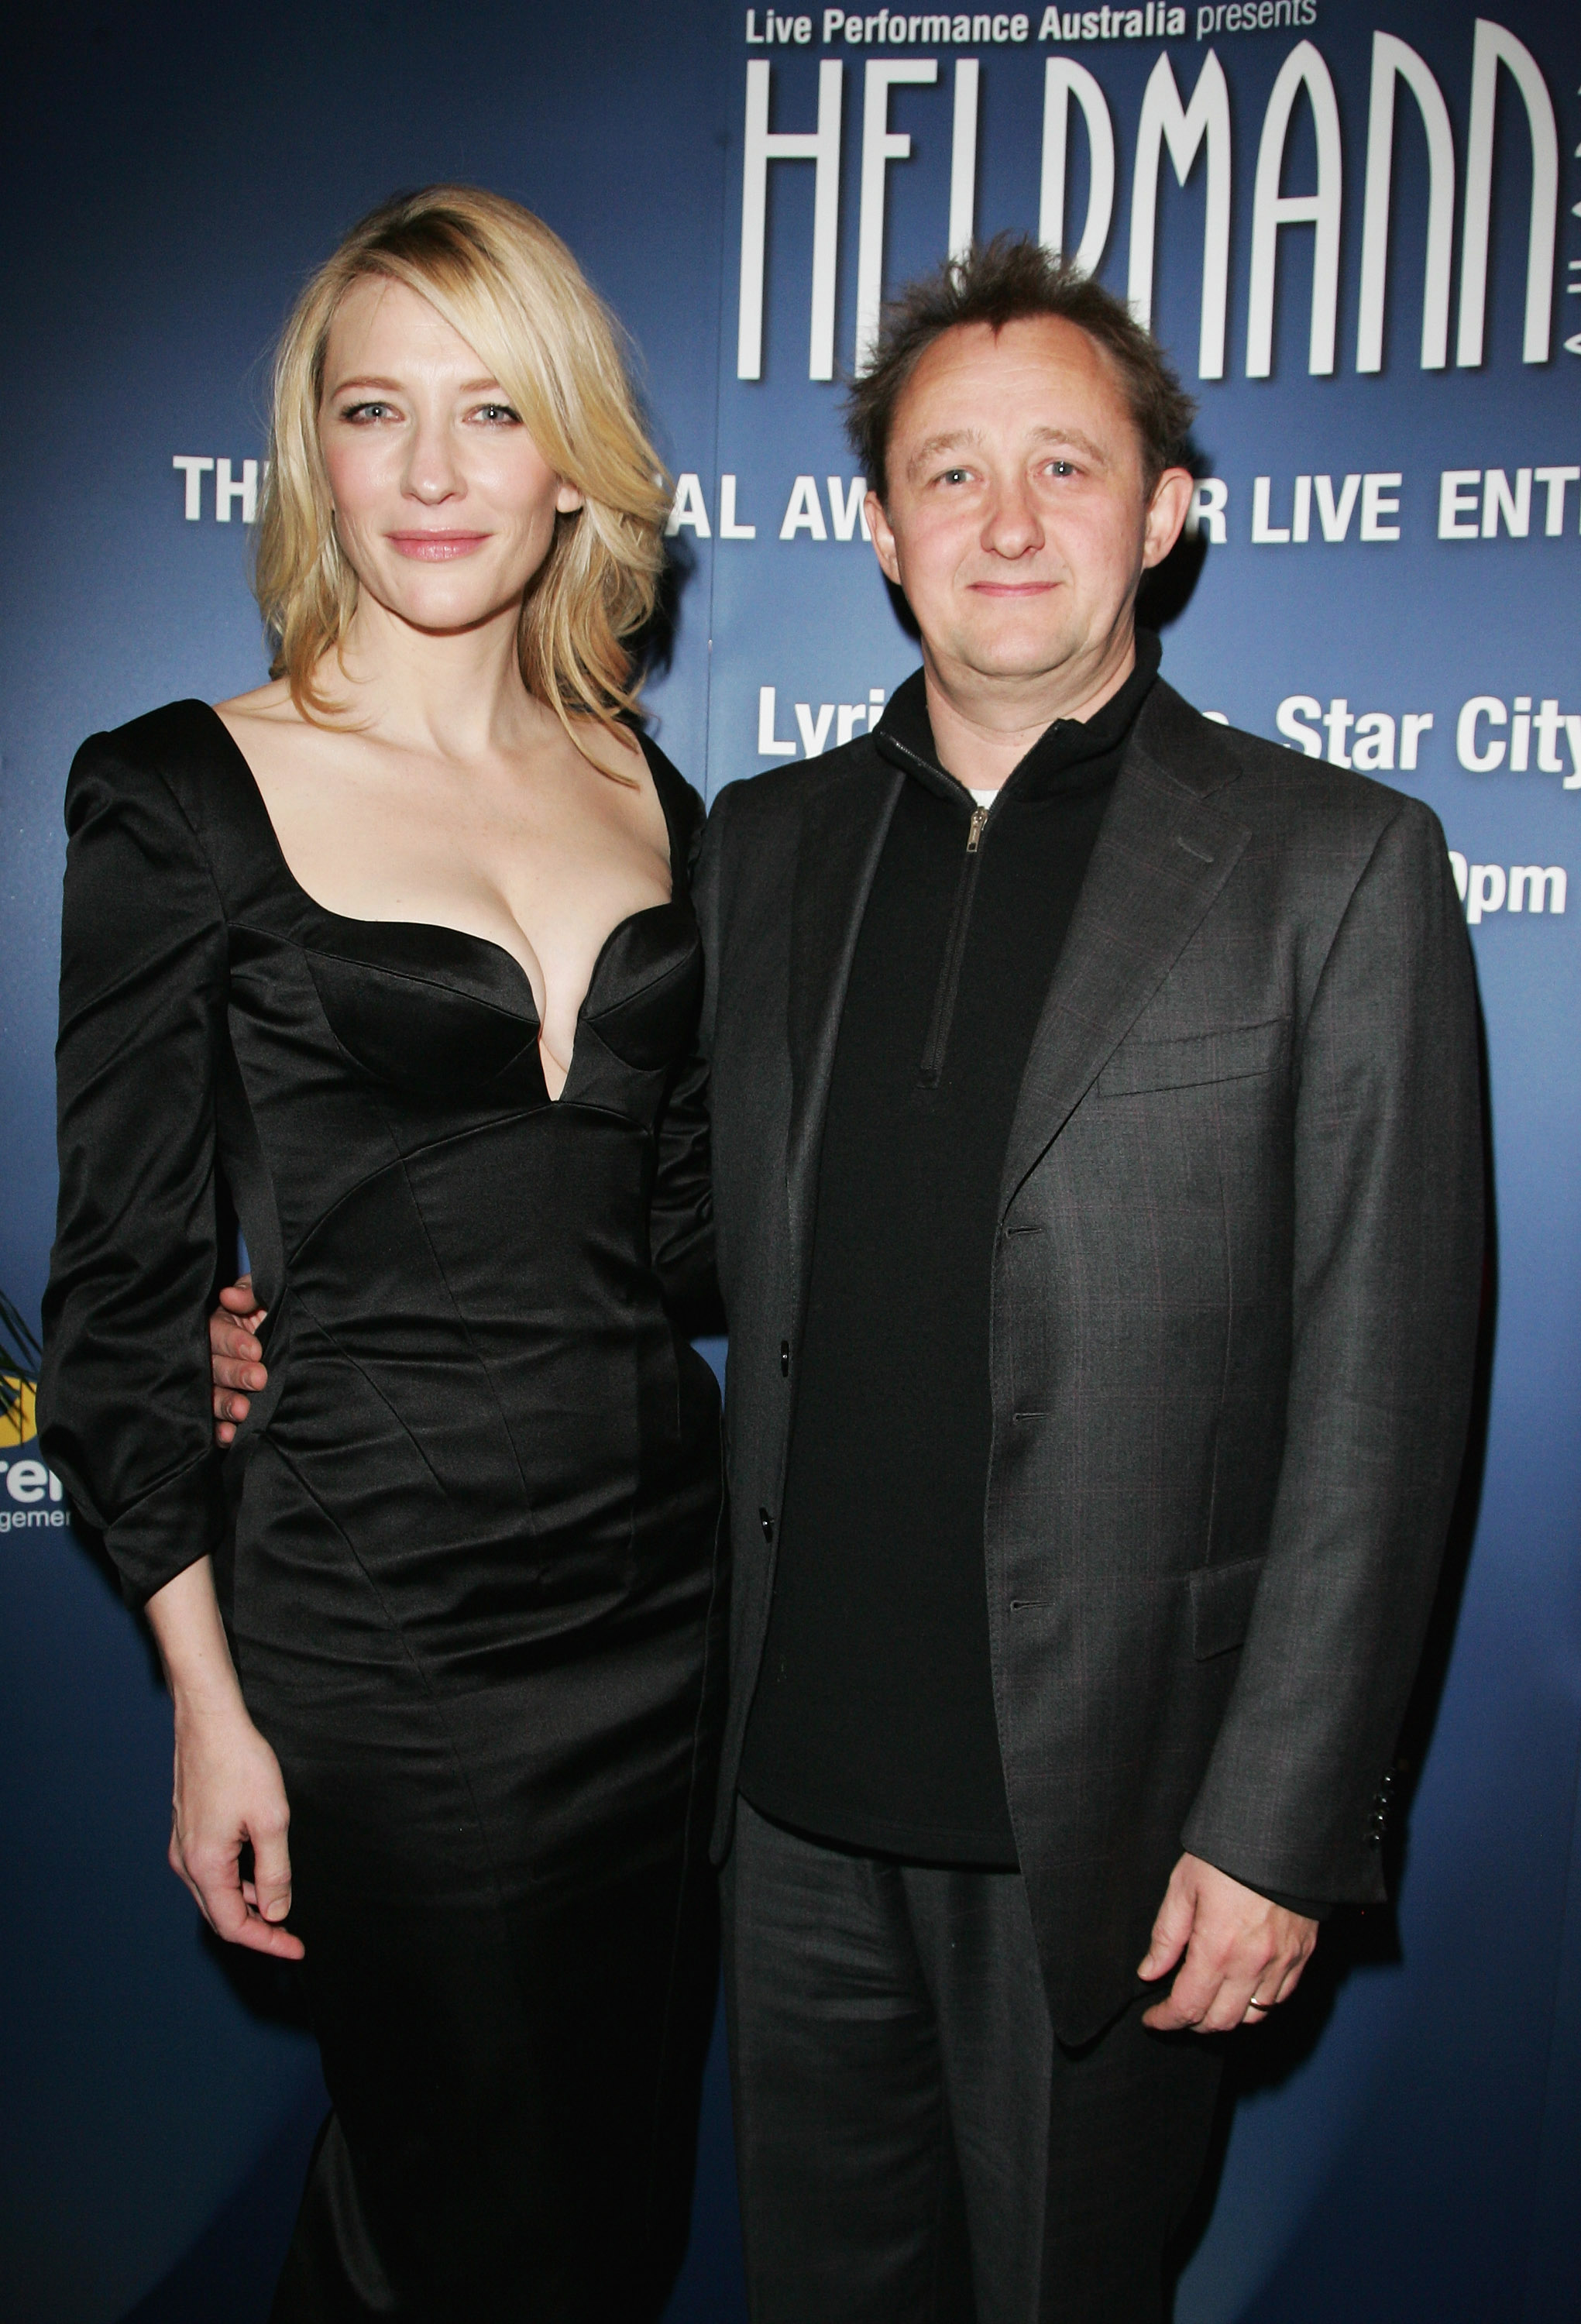 Cate Blanchett and Andrew Upton at the after party for the Helpmann Awards on July 28, 2008, in Sydney, Australia | Source: Getty Images